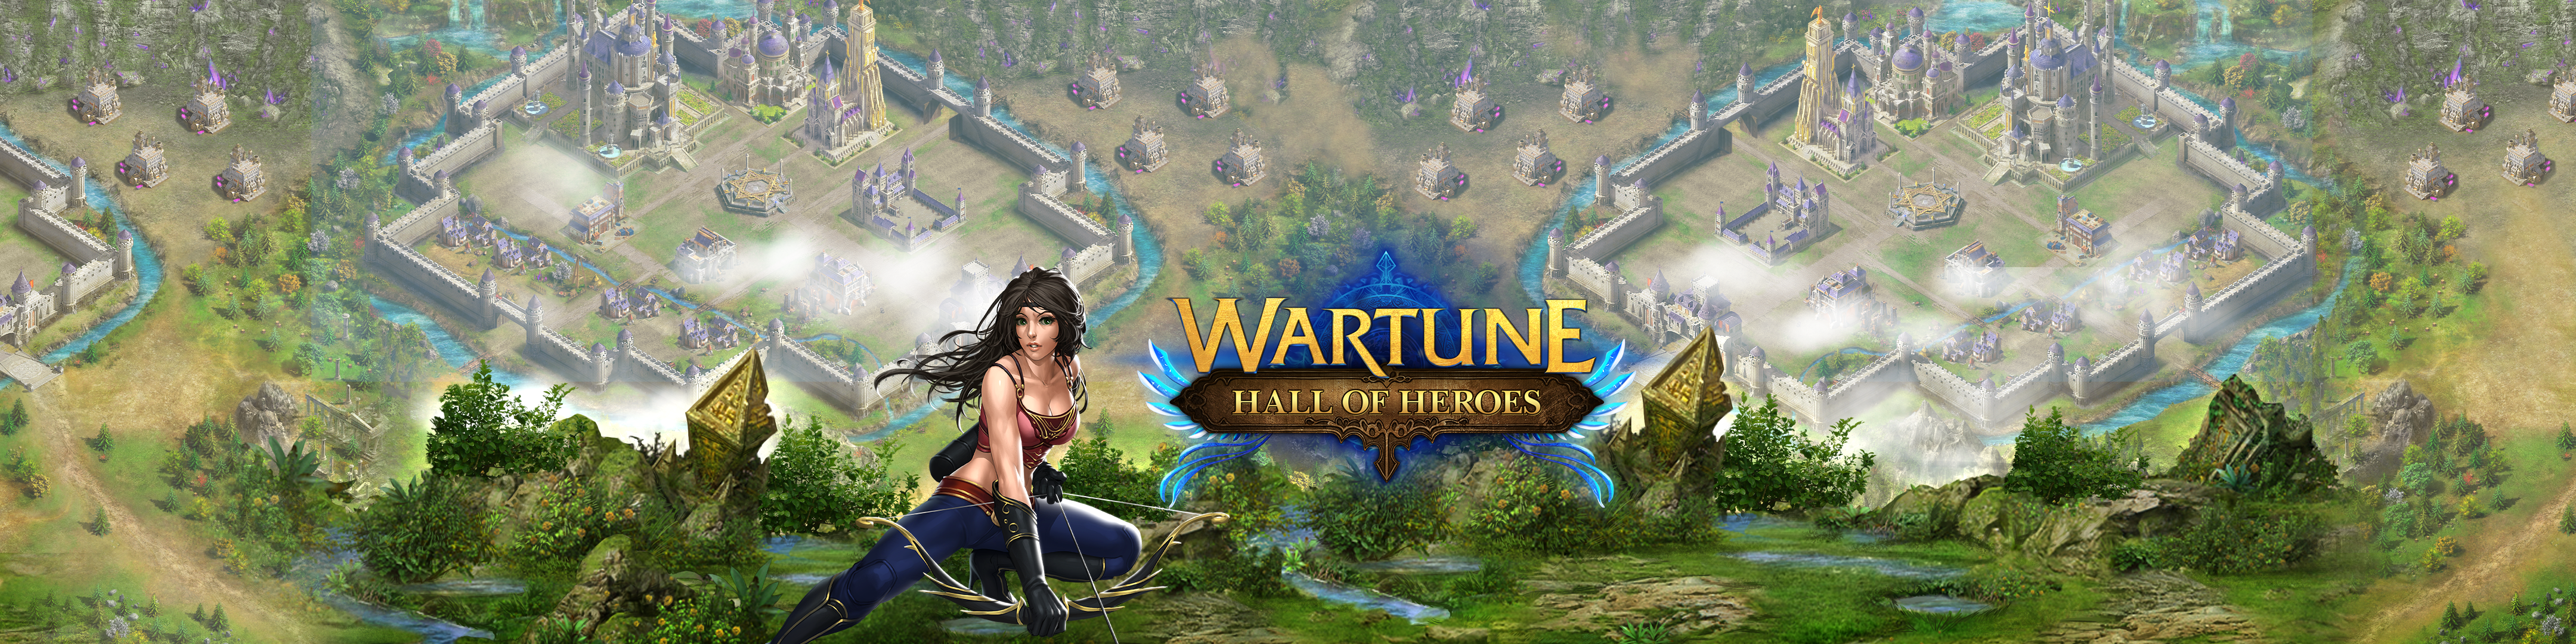 wartune hall of heroes new event codes